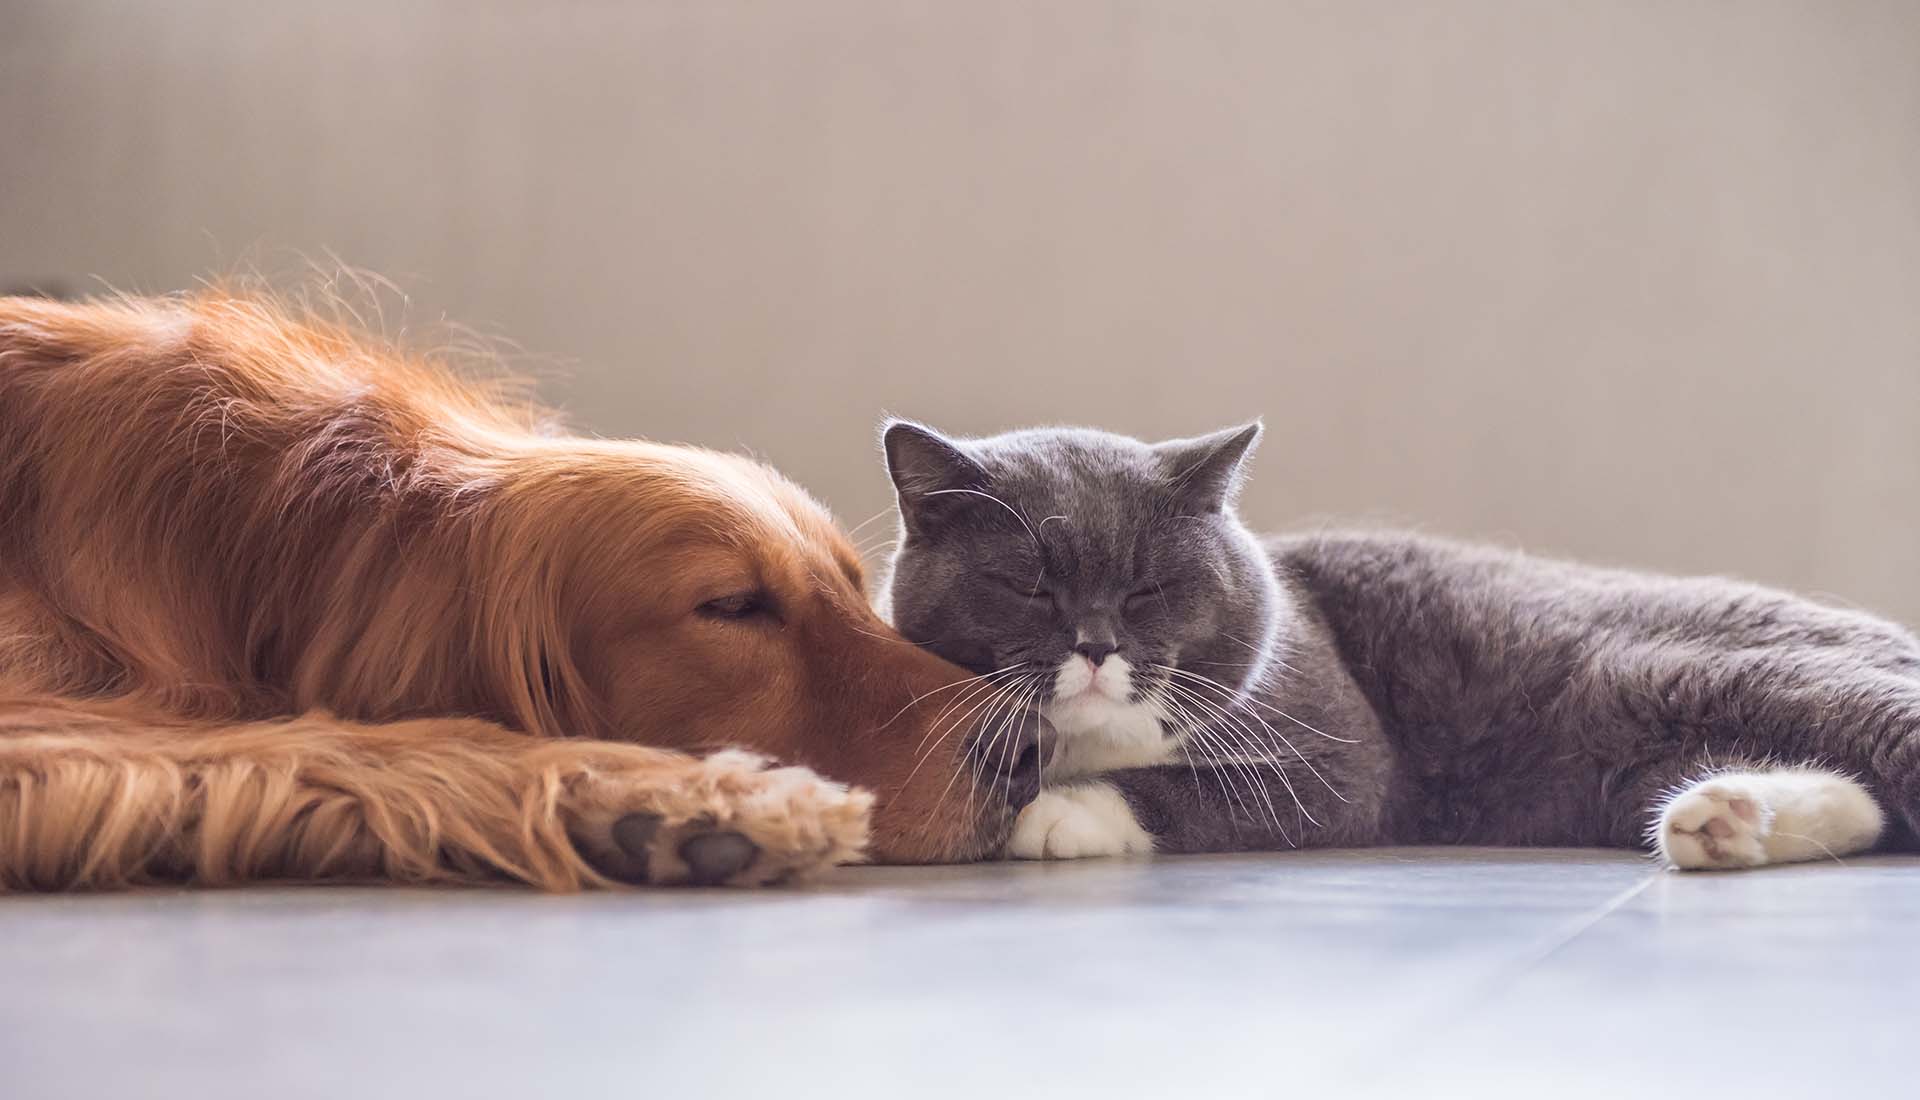 A golden retriever and a gray and white cat lay on the floor together